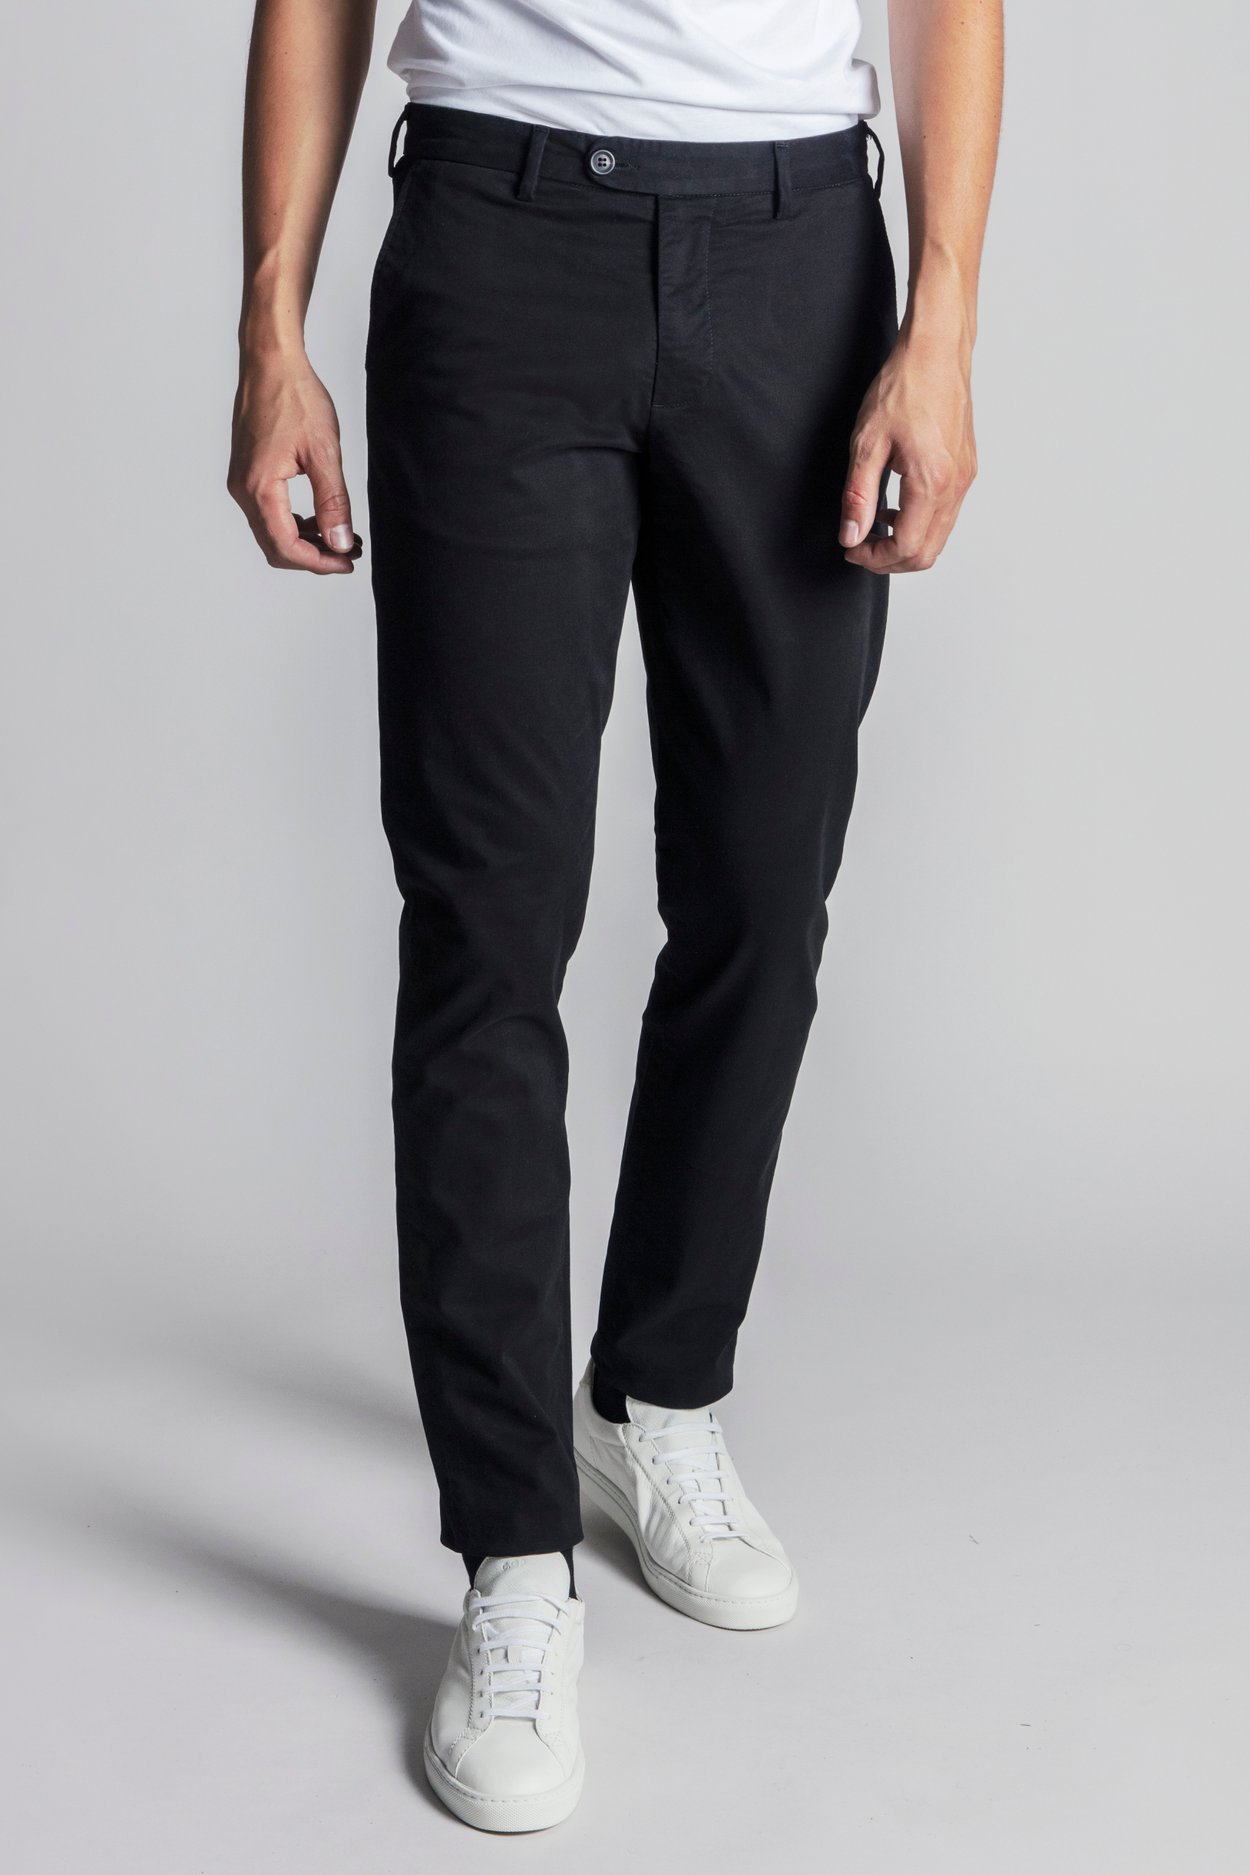 Black Chino | Tapered Cotton Stretch Trouser - ASKET